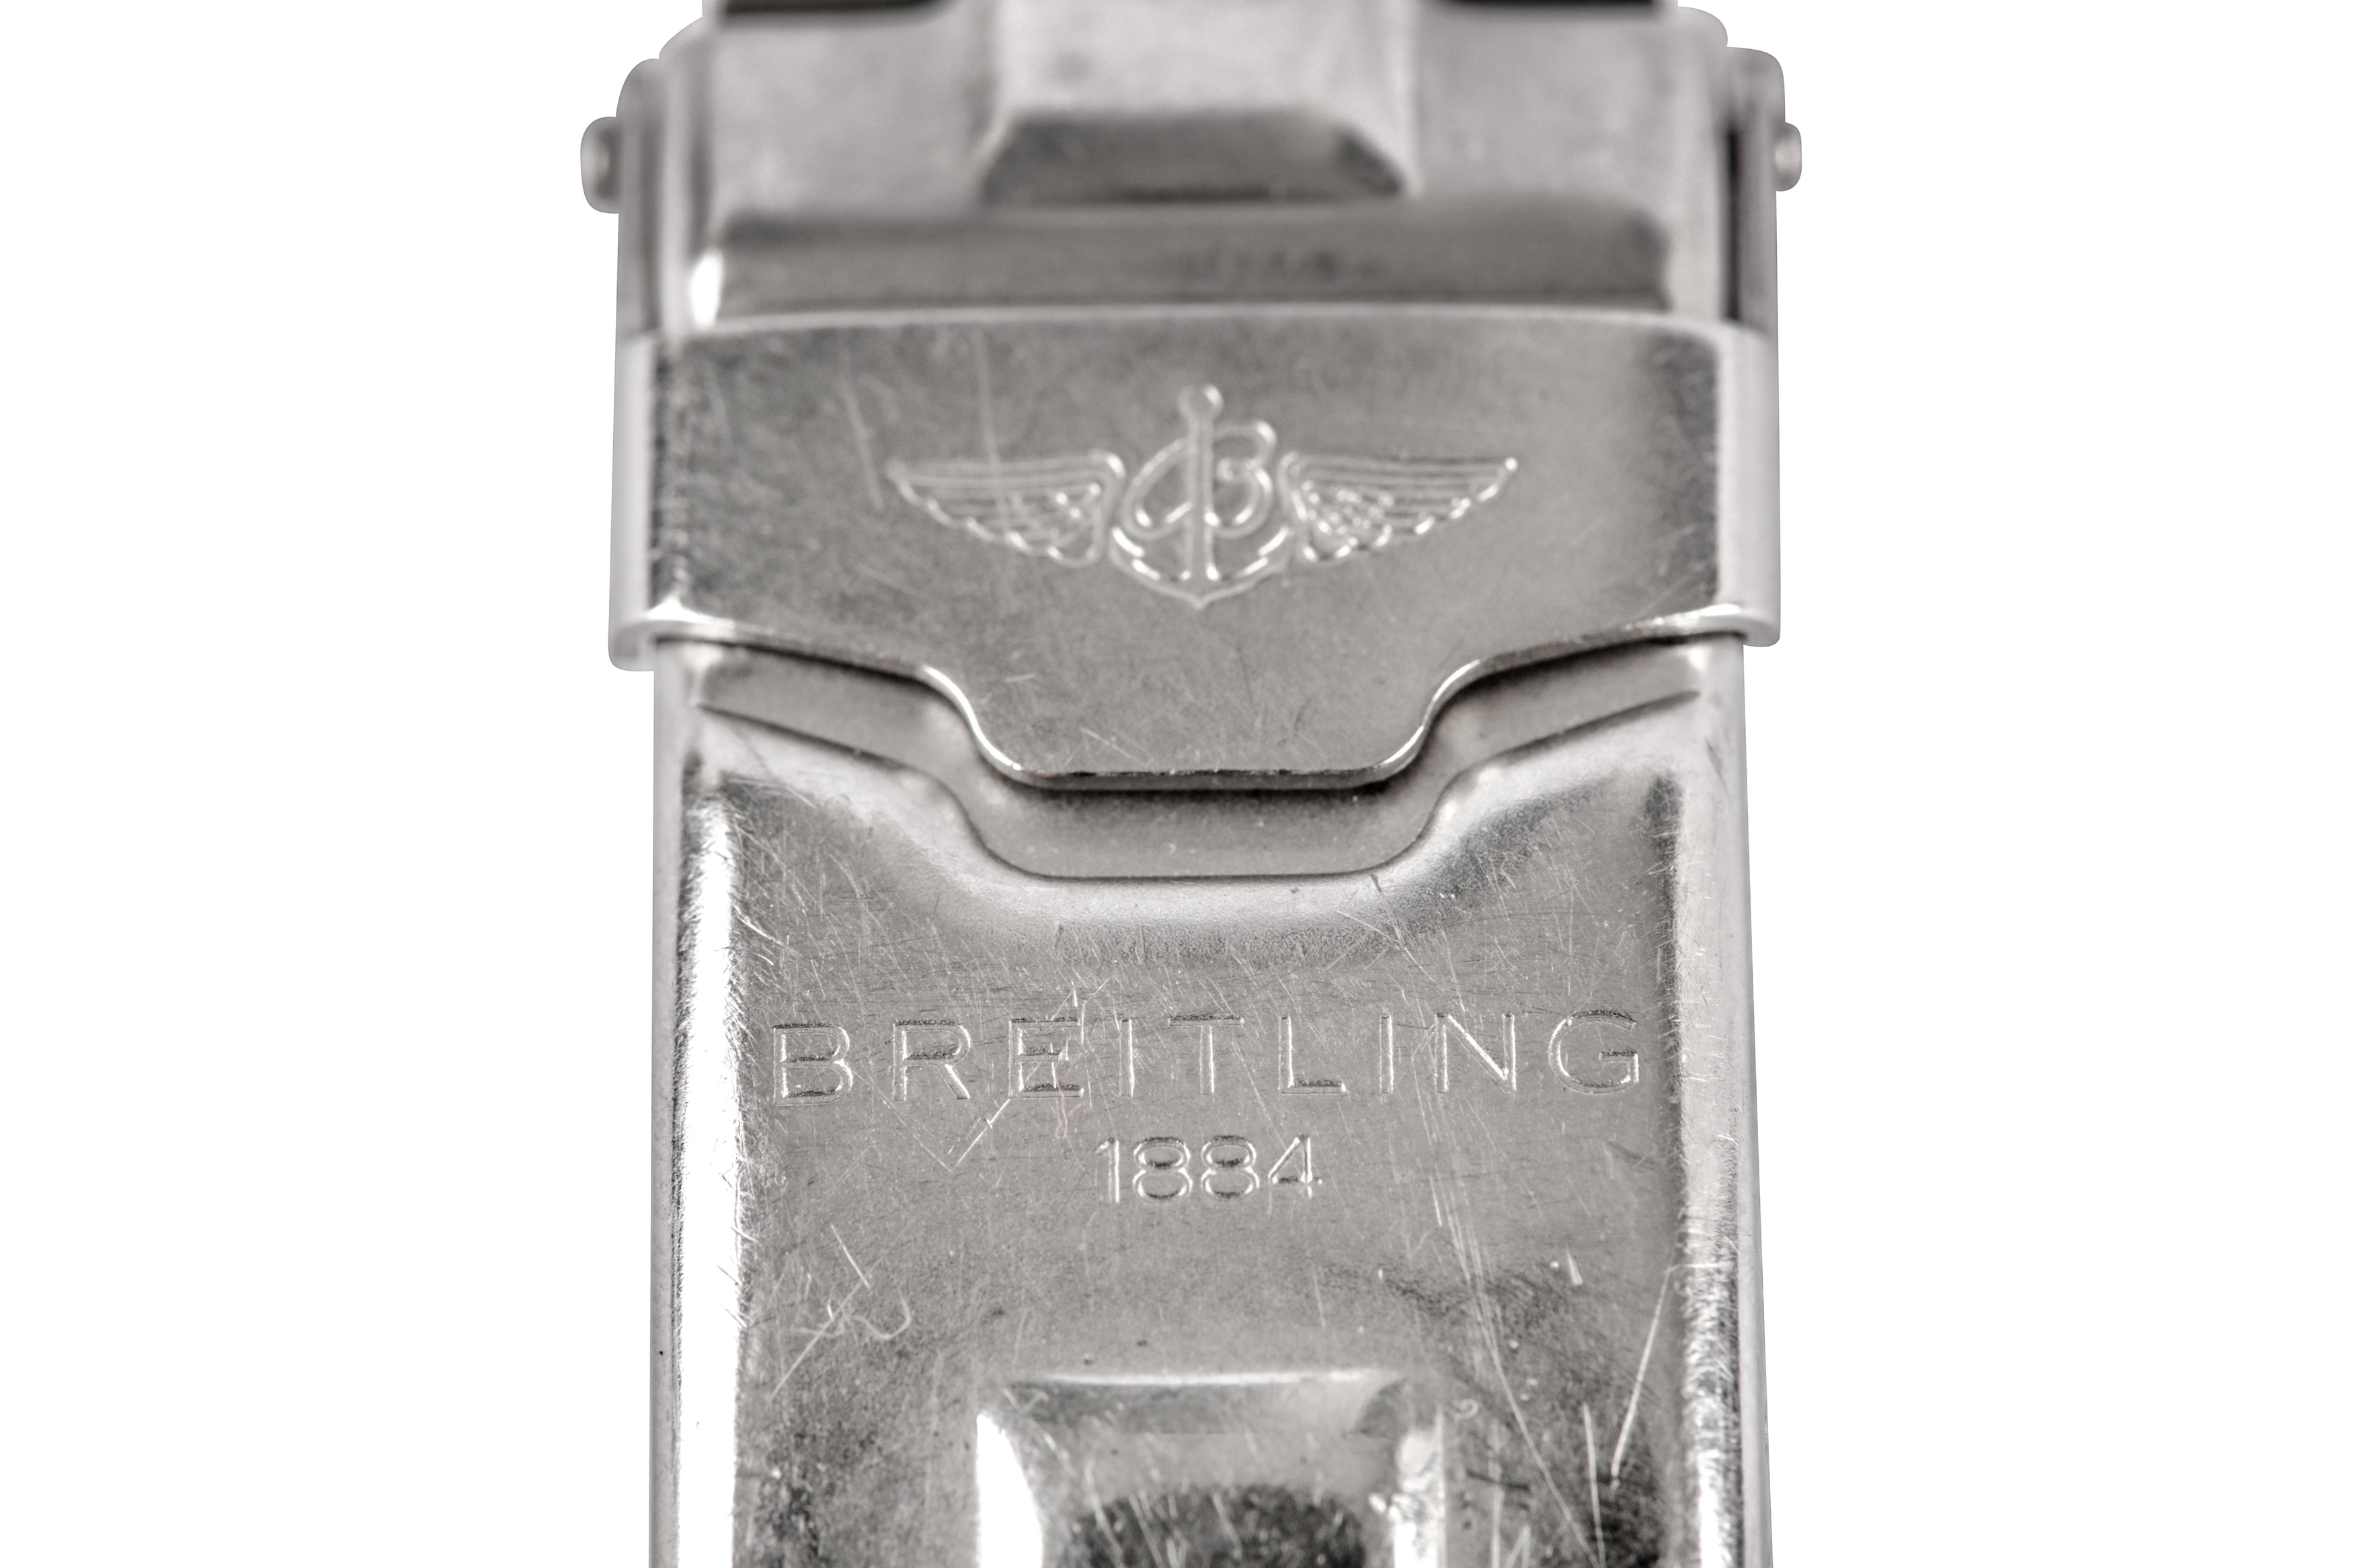 BREITLING. - Image 5 of 6